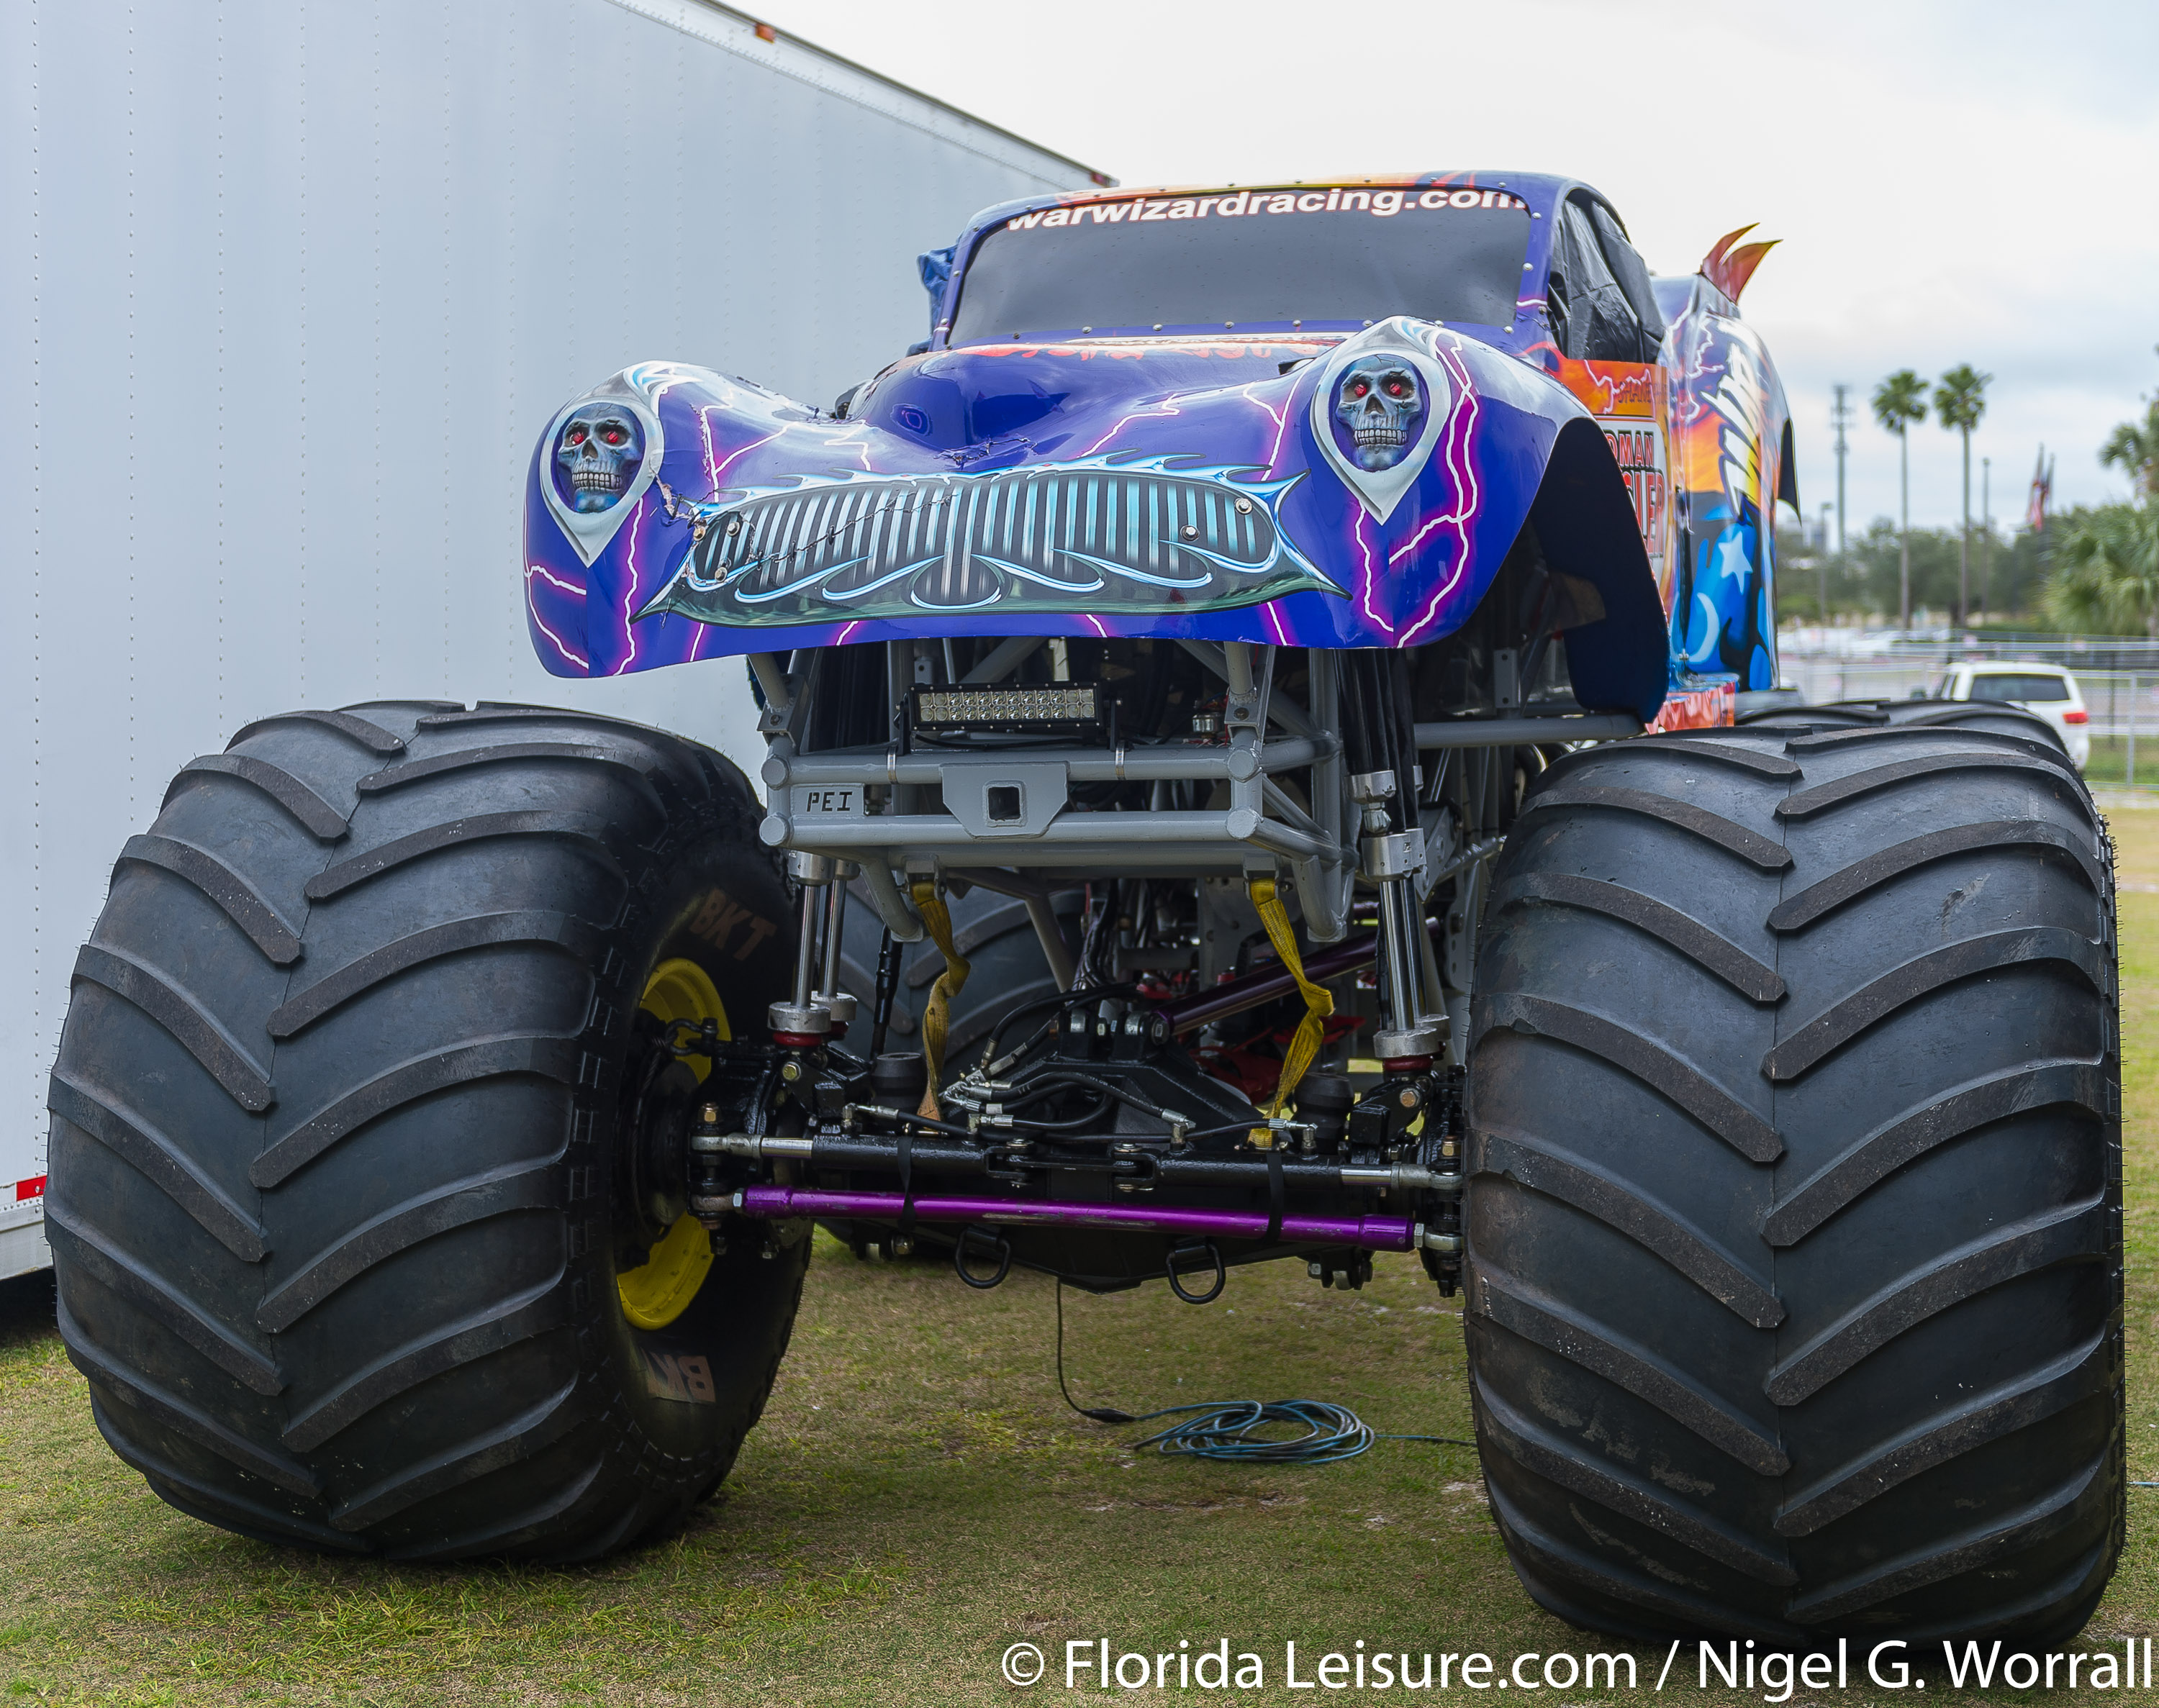 Monster Jam rolls into Orlando this weekend!